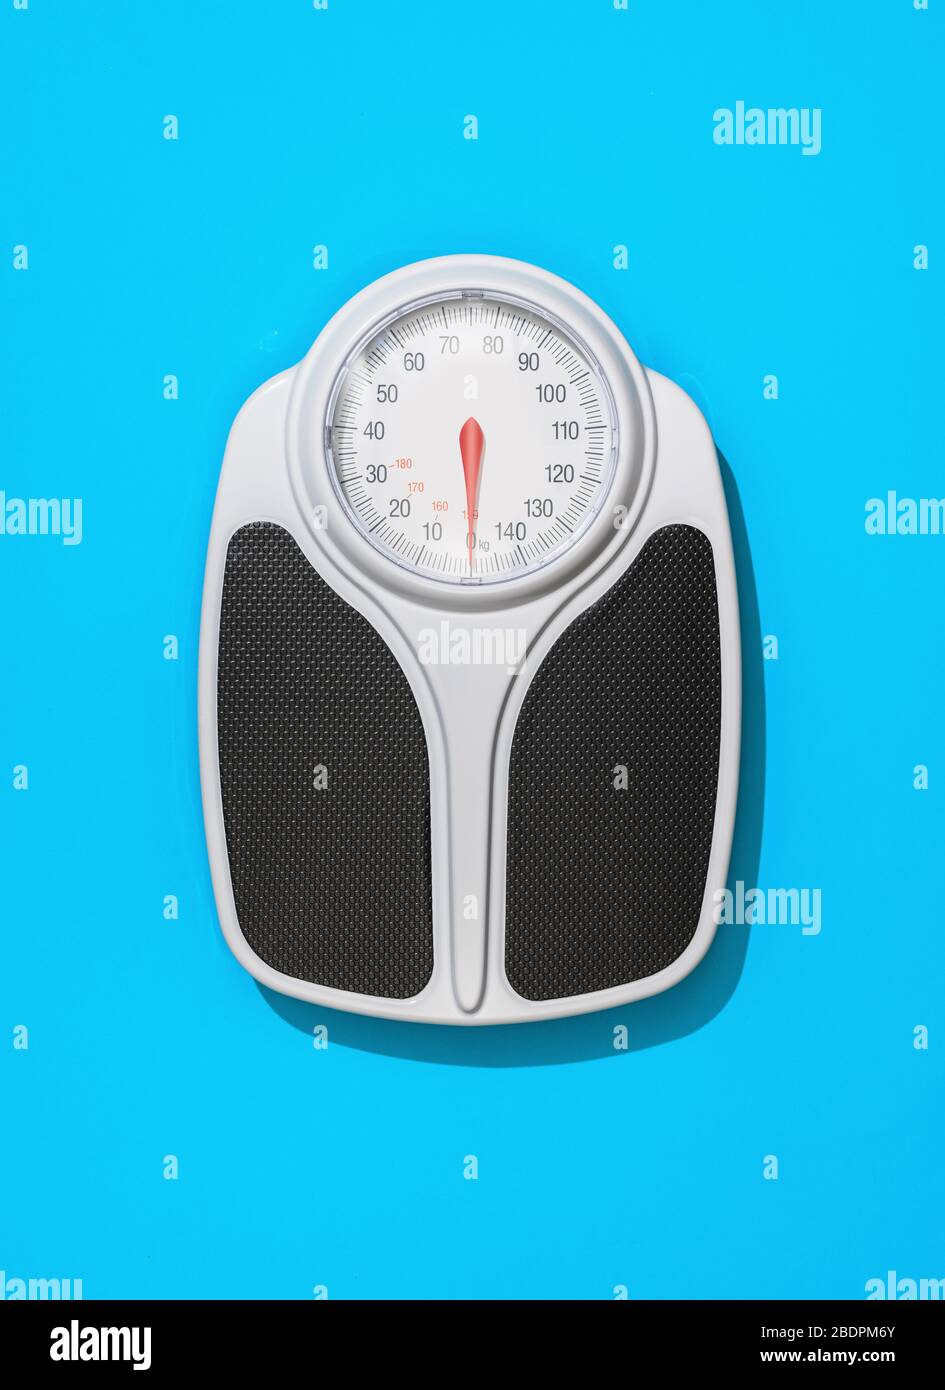 https://c8.alamy.com/comp/2BDPM6Y/analog-weight-scale-on-light-blue-background-fitness-diet-and-weight-loss-concept-2BDPM6Y.jpg